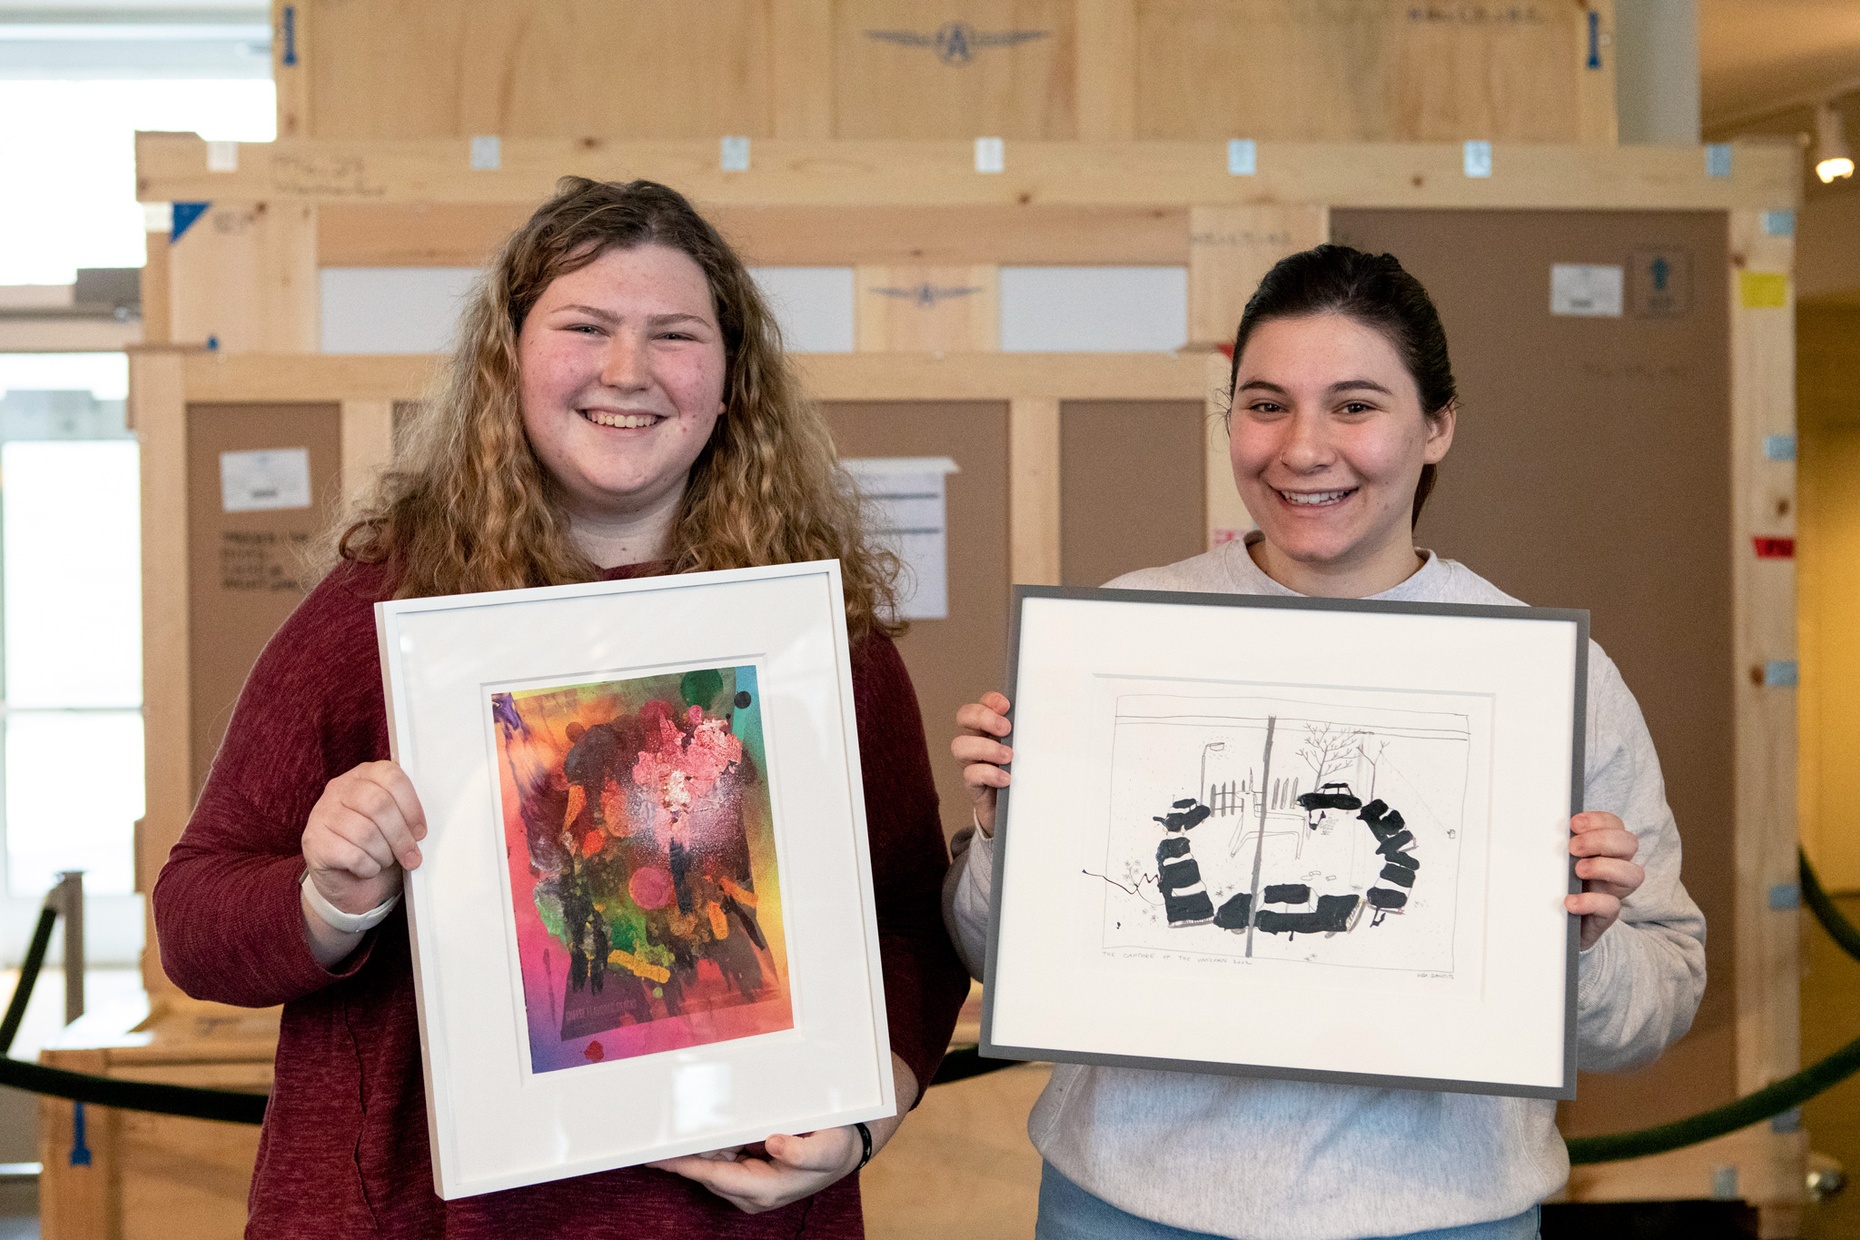 Two smiling students each hold a framed artwork in front of them, large wooden shipping crates are in the background.